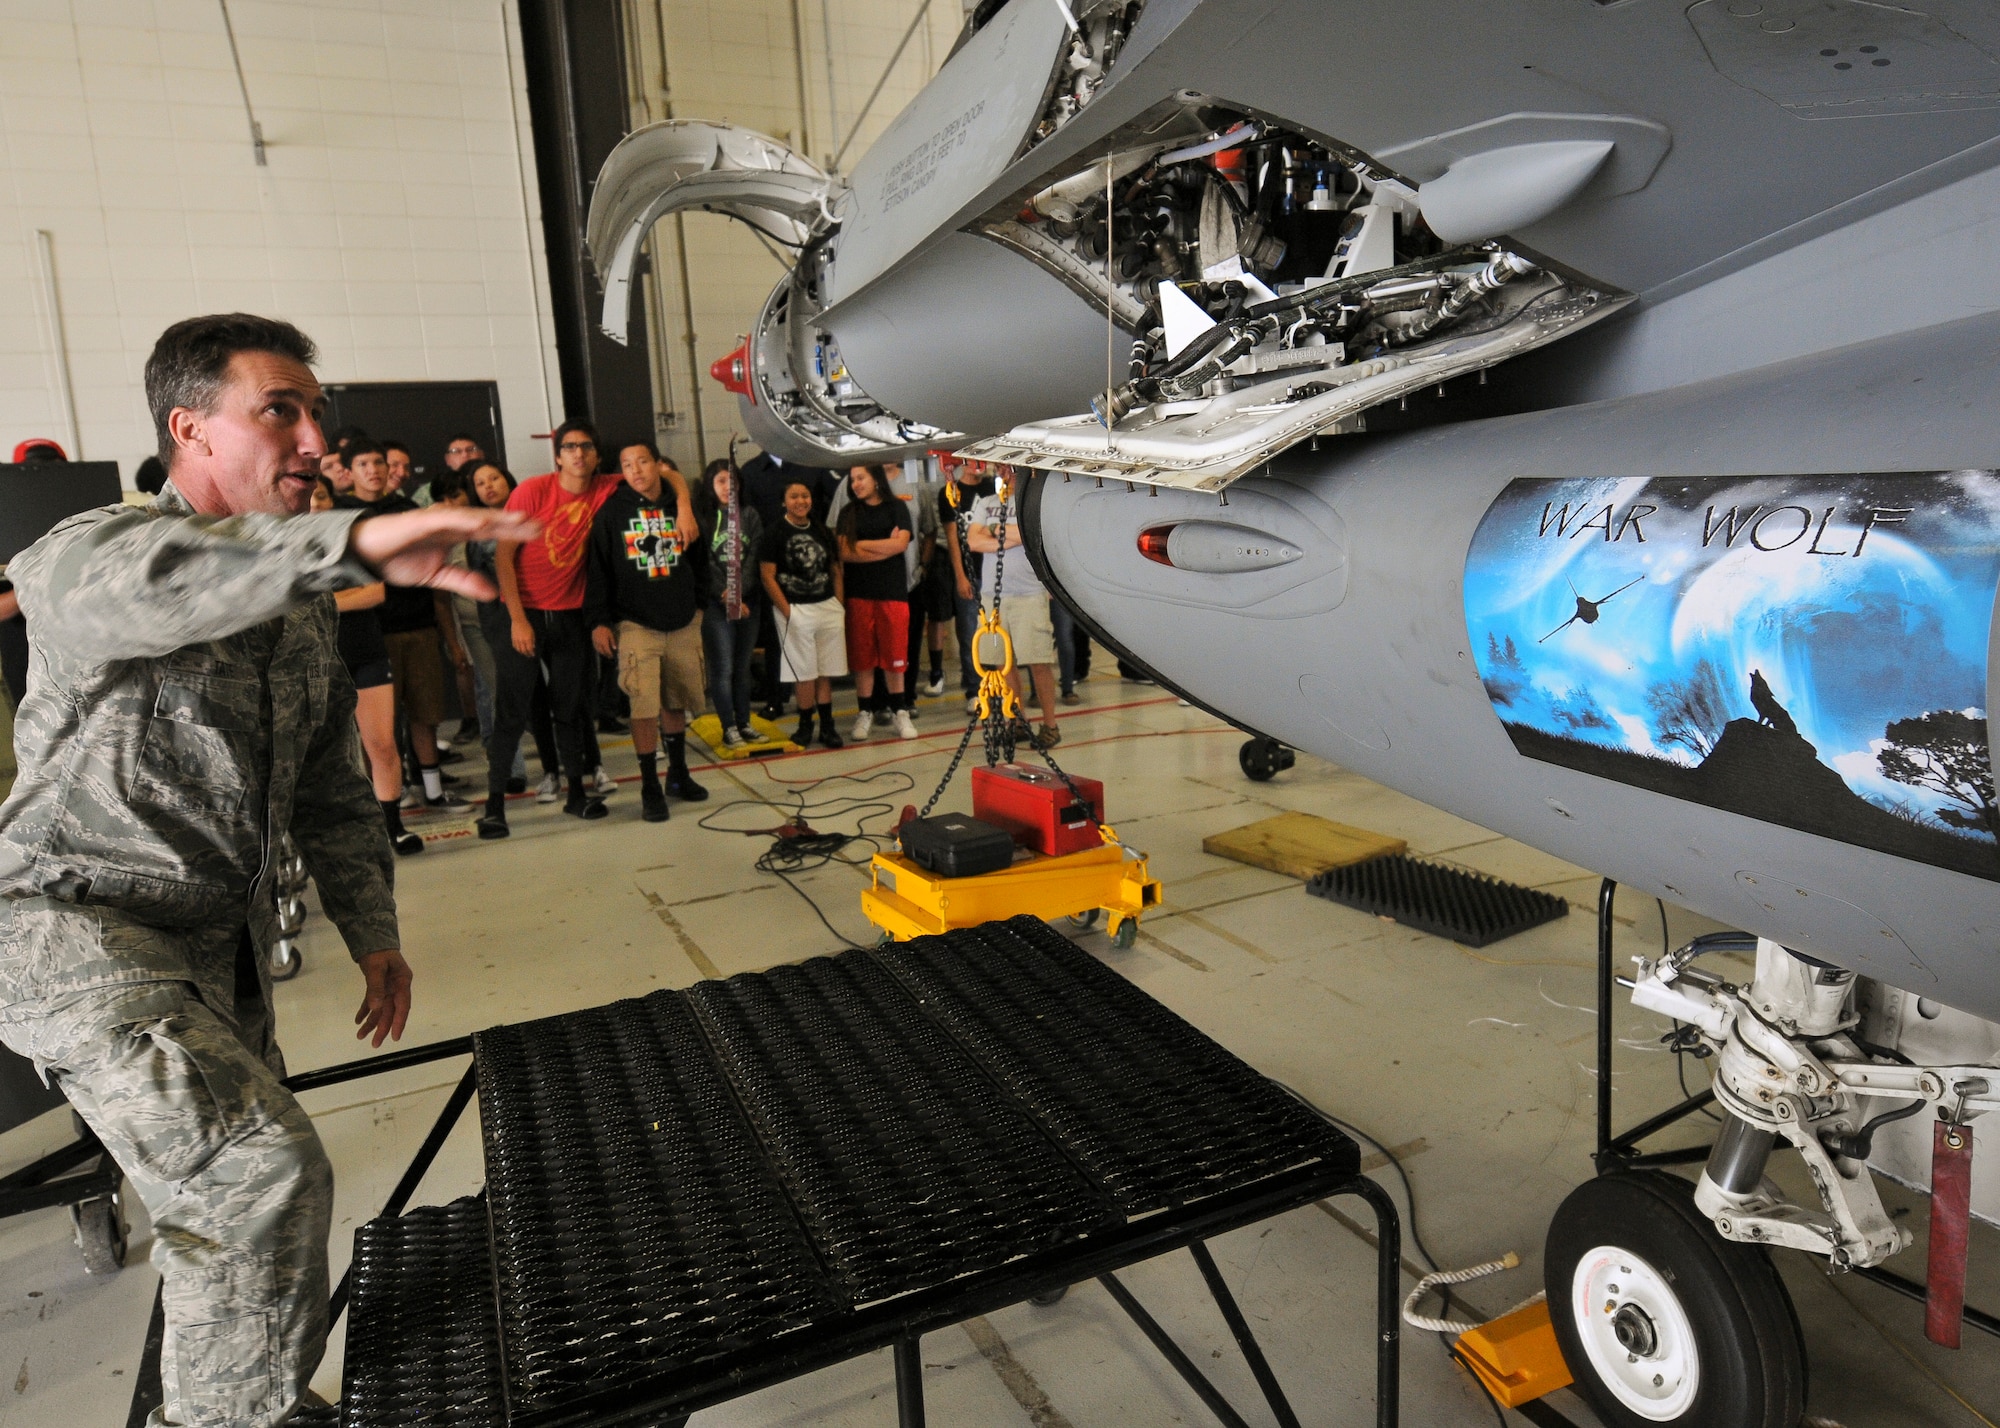 Master Sgt. Darrin Tate, 114th Aircraft Maintenance Squadron avionics technician, describes the basic functions of an F-16 Fighting Falcon to students from the Flandreau Indian School Summer Academy during a base tour of the 114th Fighter Wing in Sioux Falls, S.D., May 29, 2015. The students toured the 114th FW and were briefed about the many roles and specialized fields that make up the South Dakota Air National Guard.(National Guard photo by Staff Sgt. Luke Olson/Released)